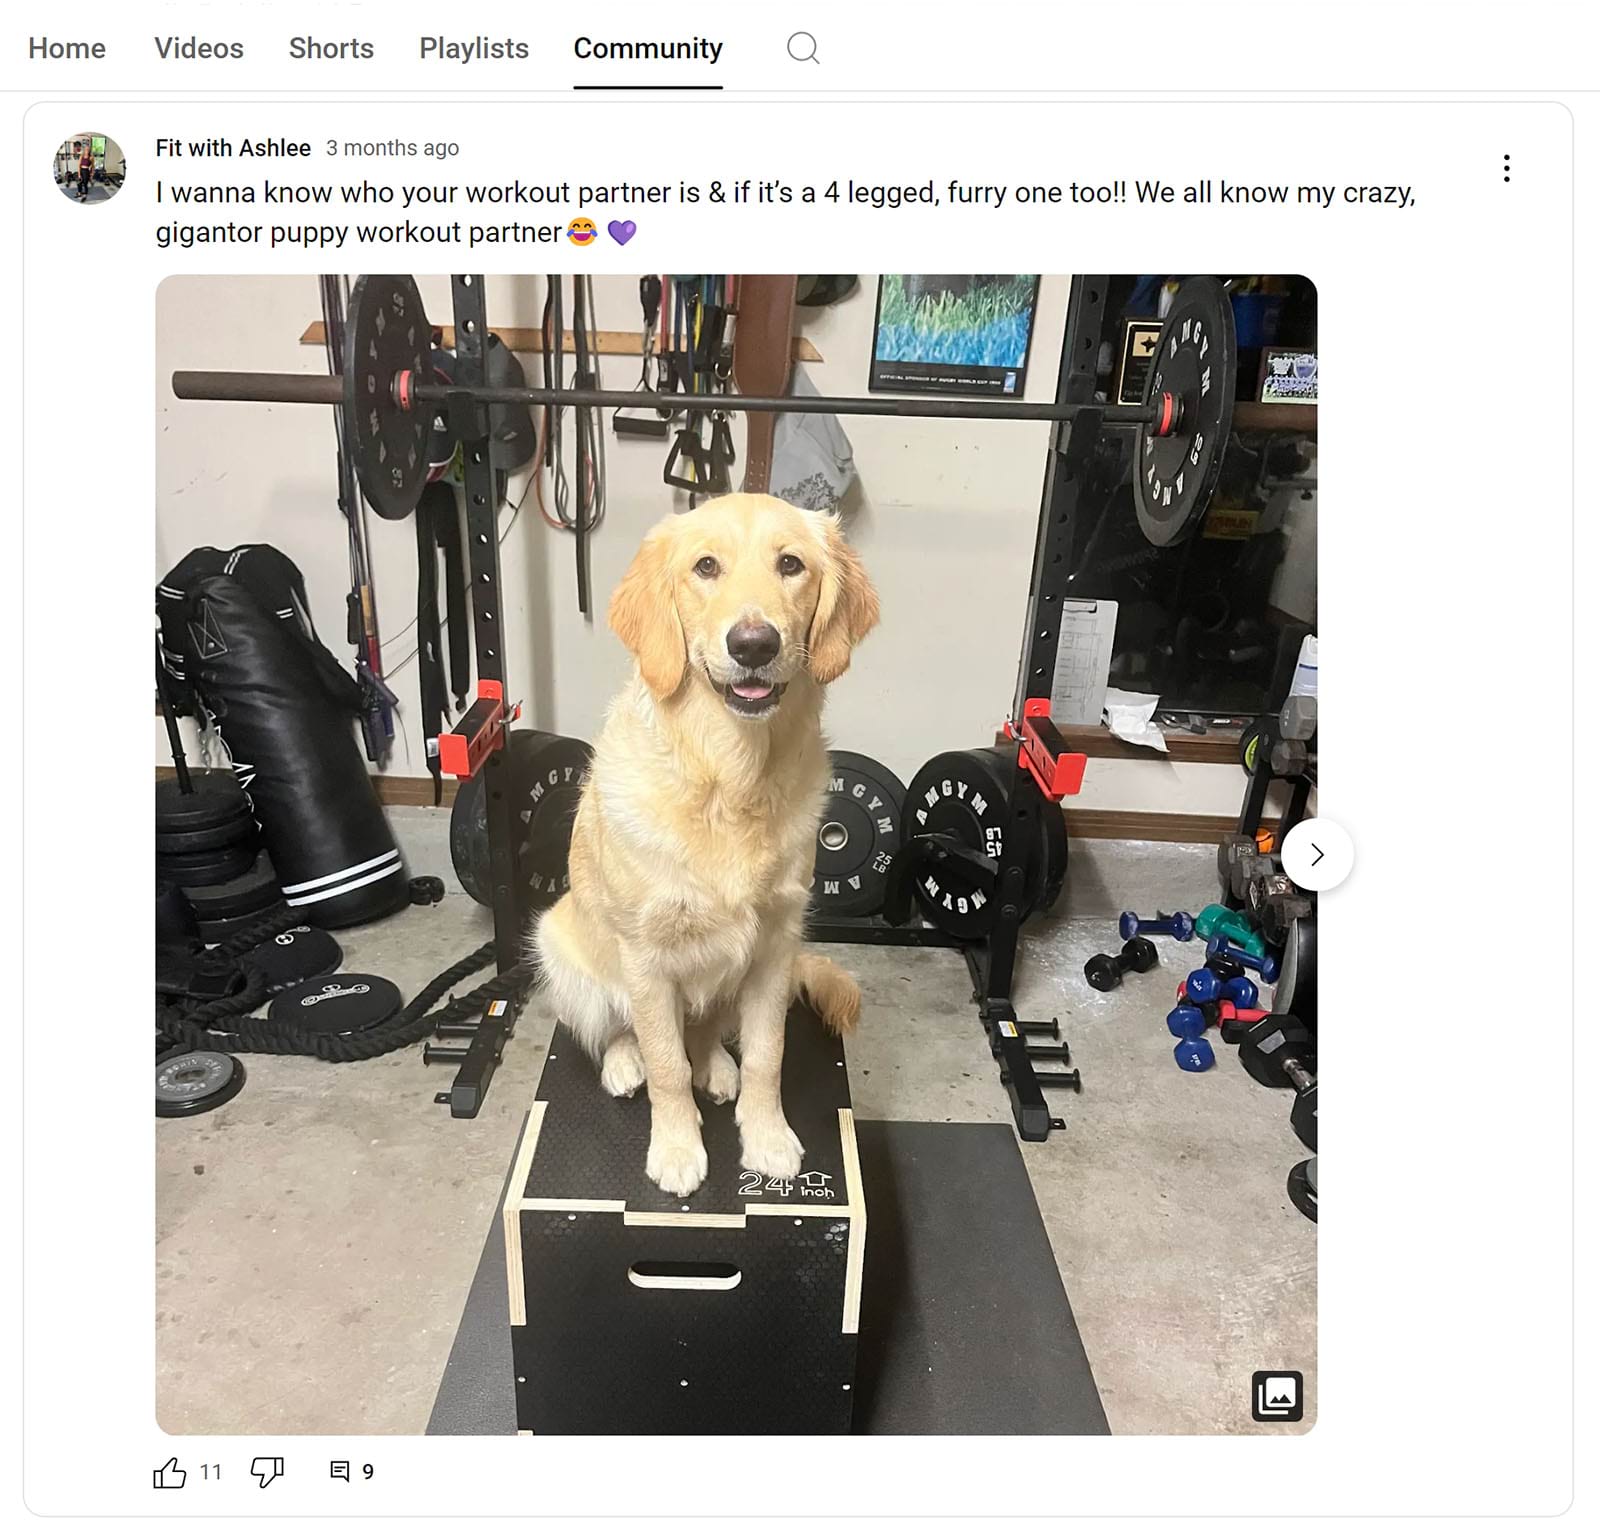 Community post by Fit with Ashlee showing dog sitting in front of squat rack.